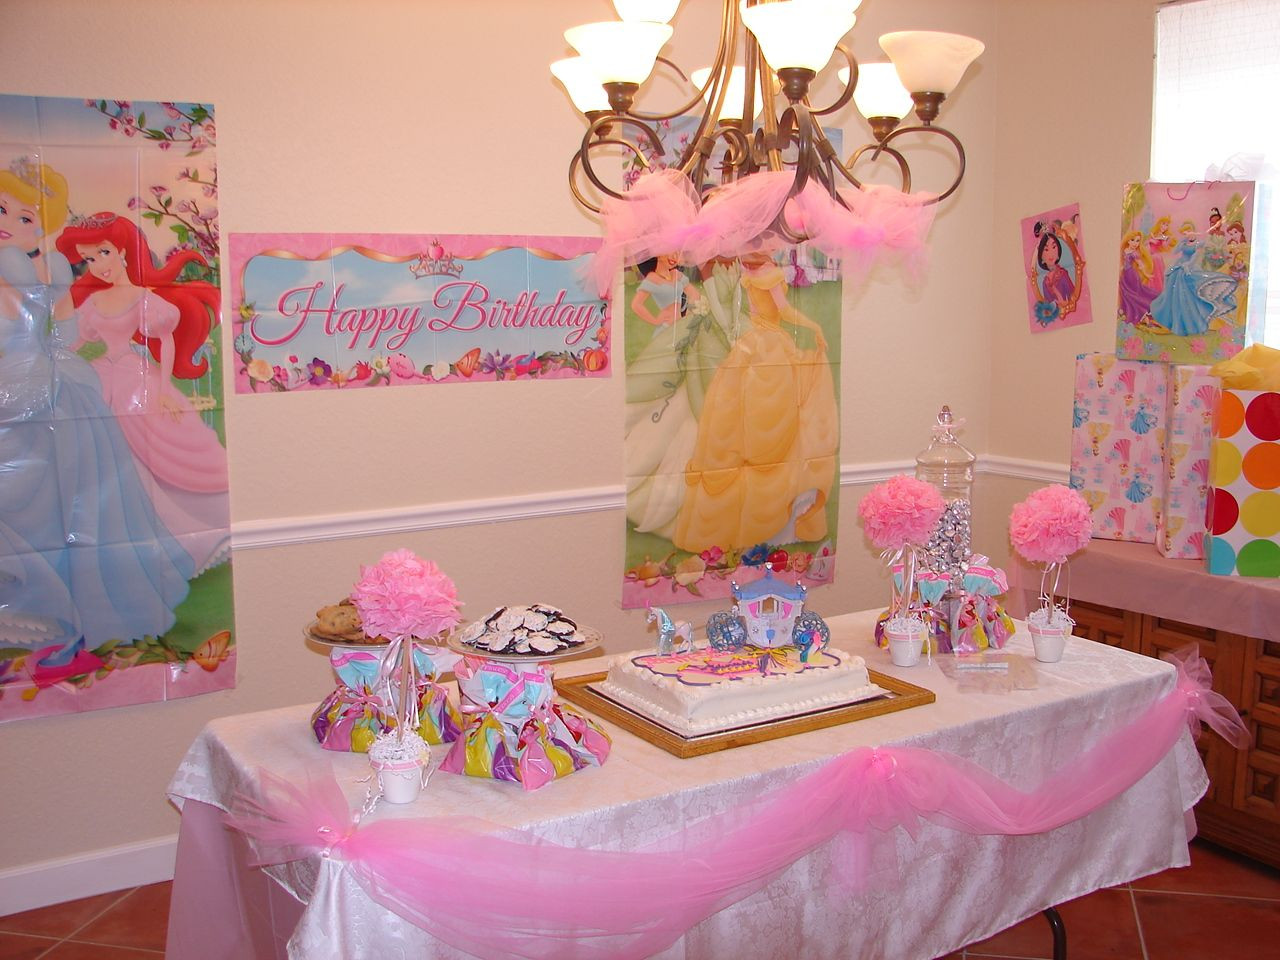 Cake Table Decorations For Birthday
 Princess party cake table decorations